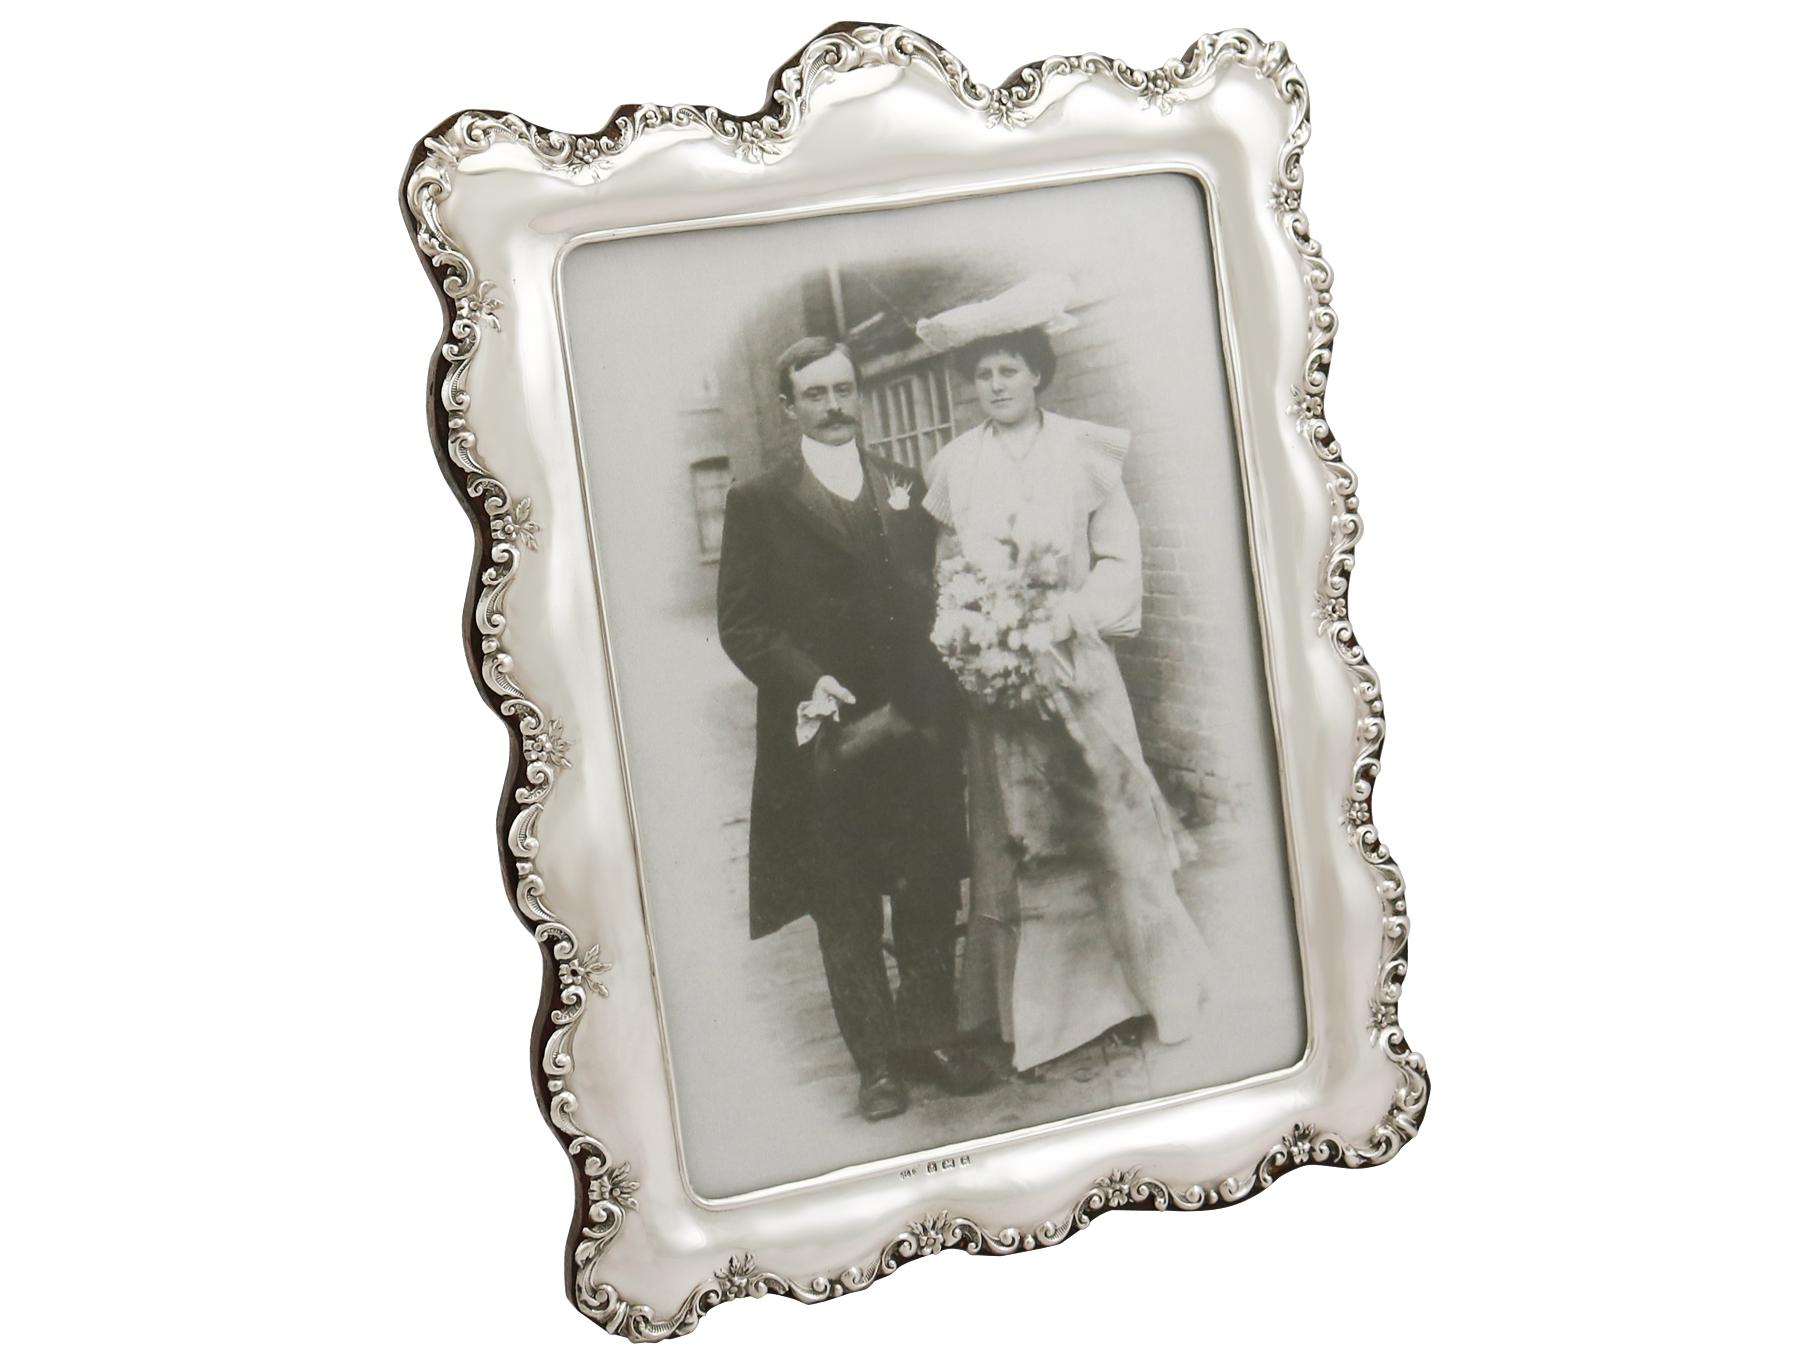 An exceptional, fine and impressive pair of antique George V English sterling silver photograph frame; an addition to our silver mounted glass collection.

These exceptional antique Edwardian English sterling silver photograph frames have a